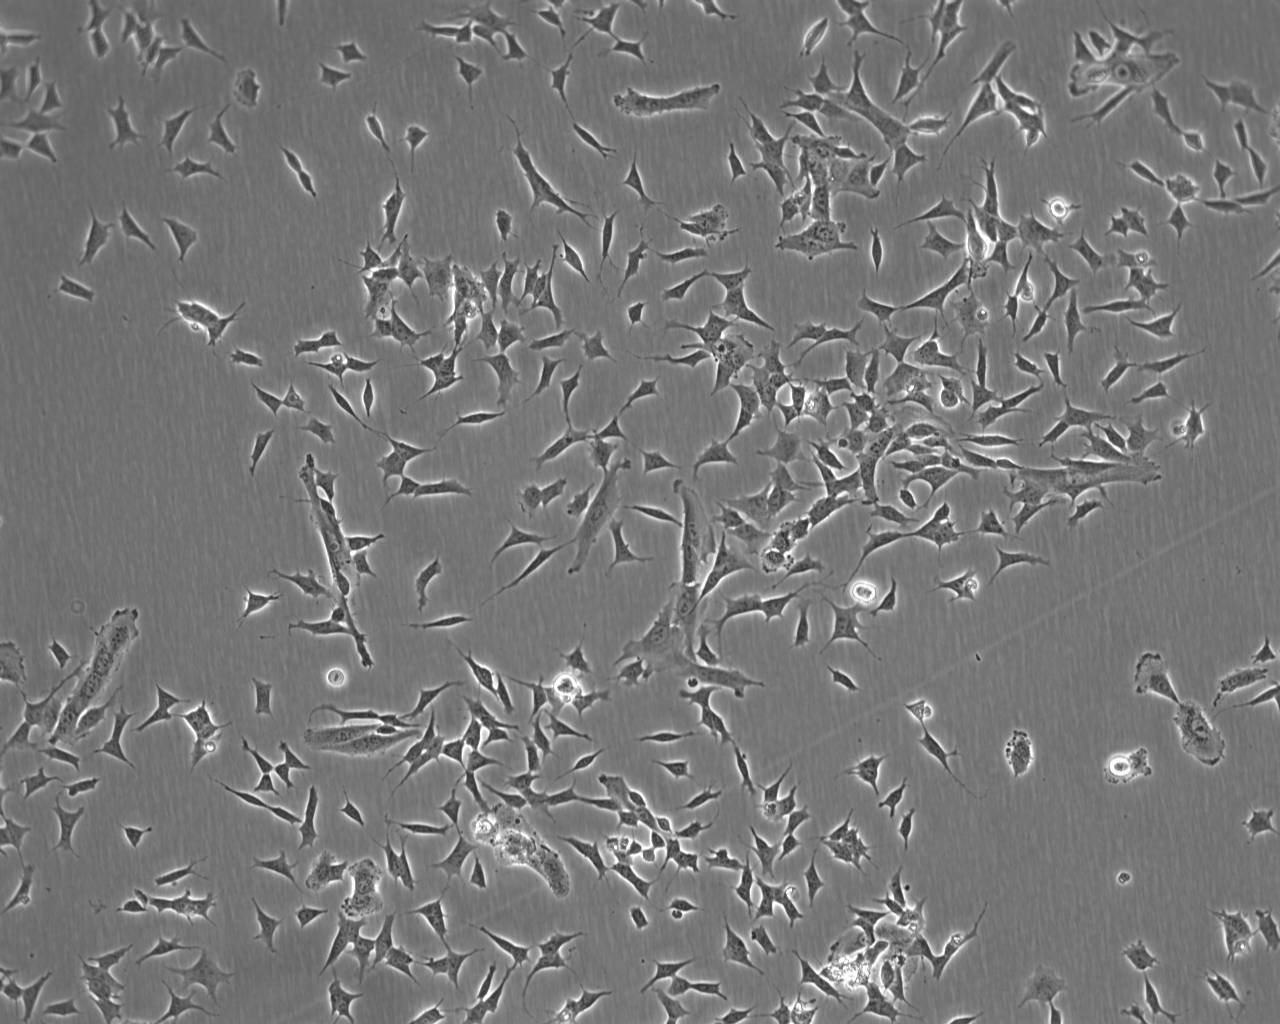 BEL-7404 epithelioid cells人肝癌细胞系,BEL-7404 epithelioid cells